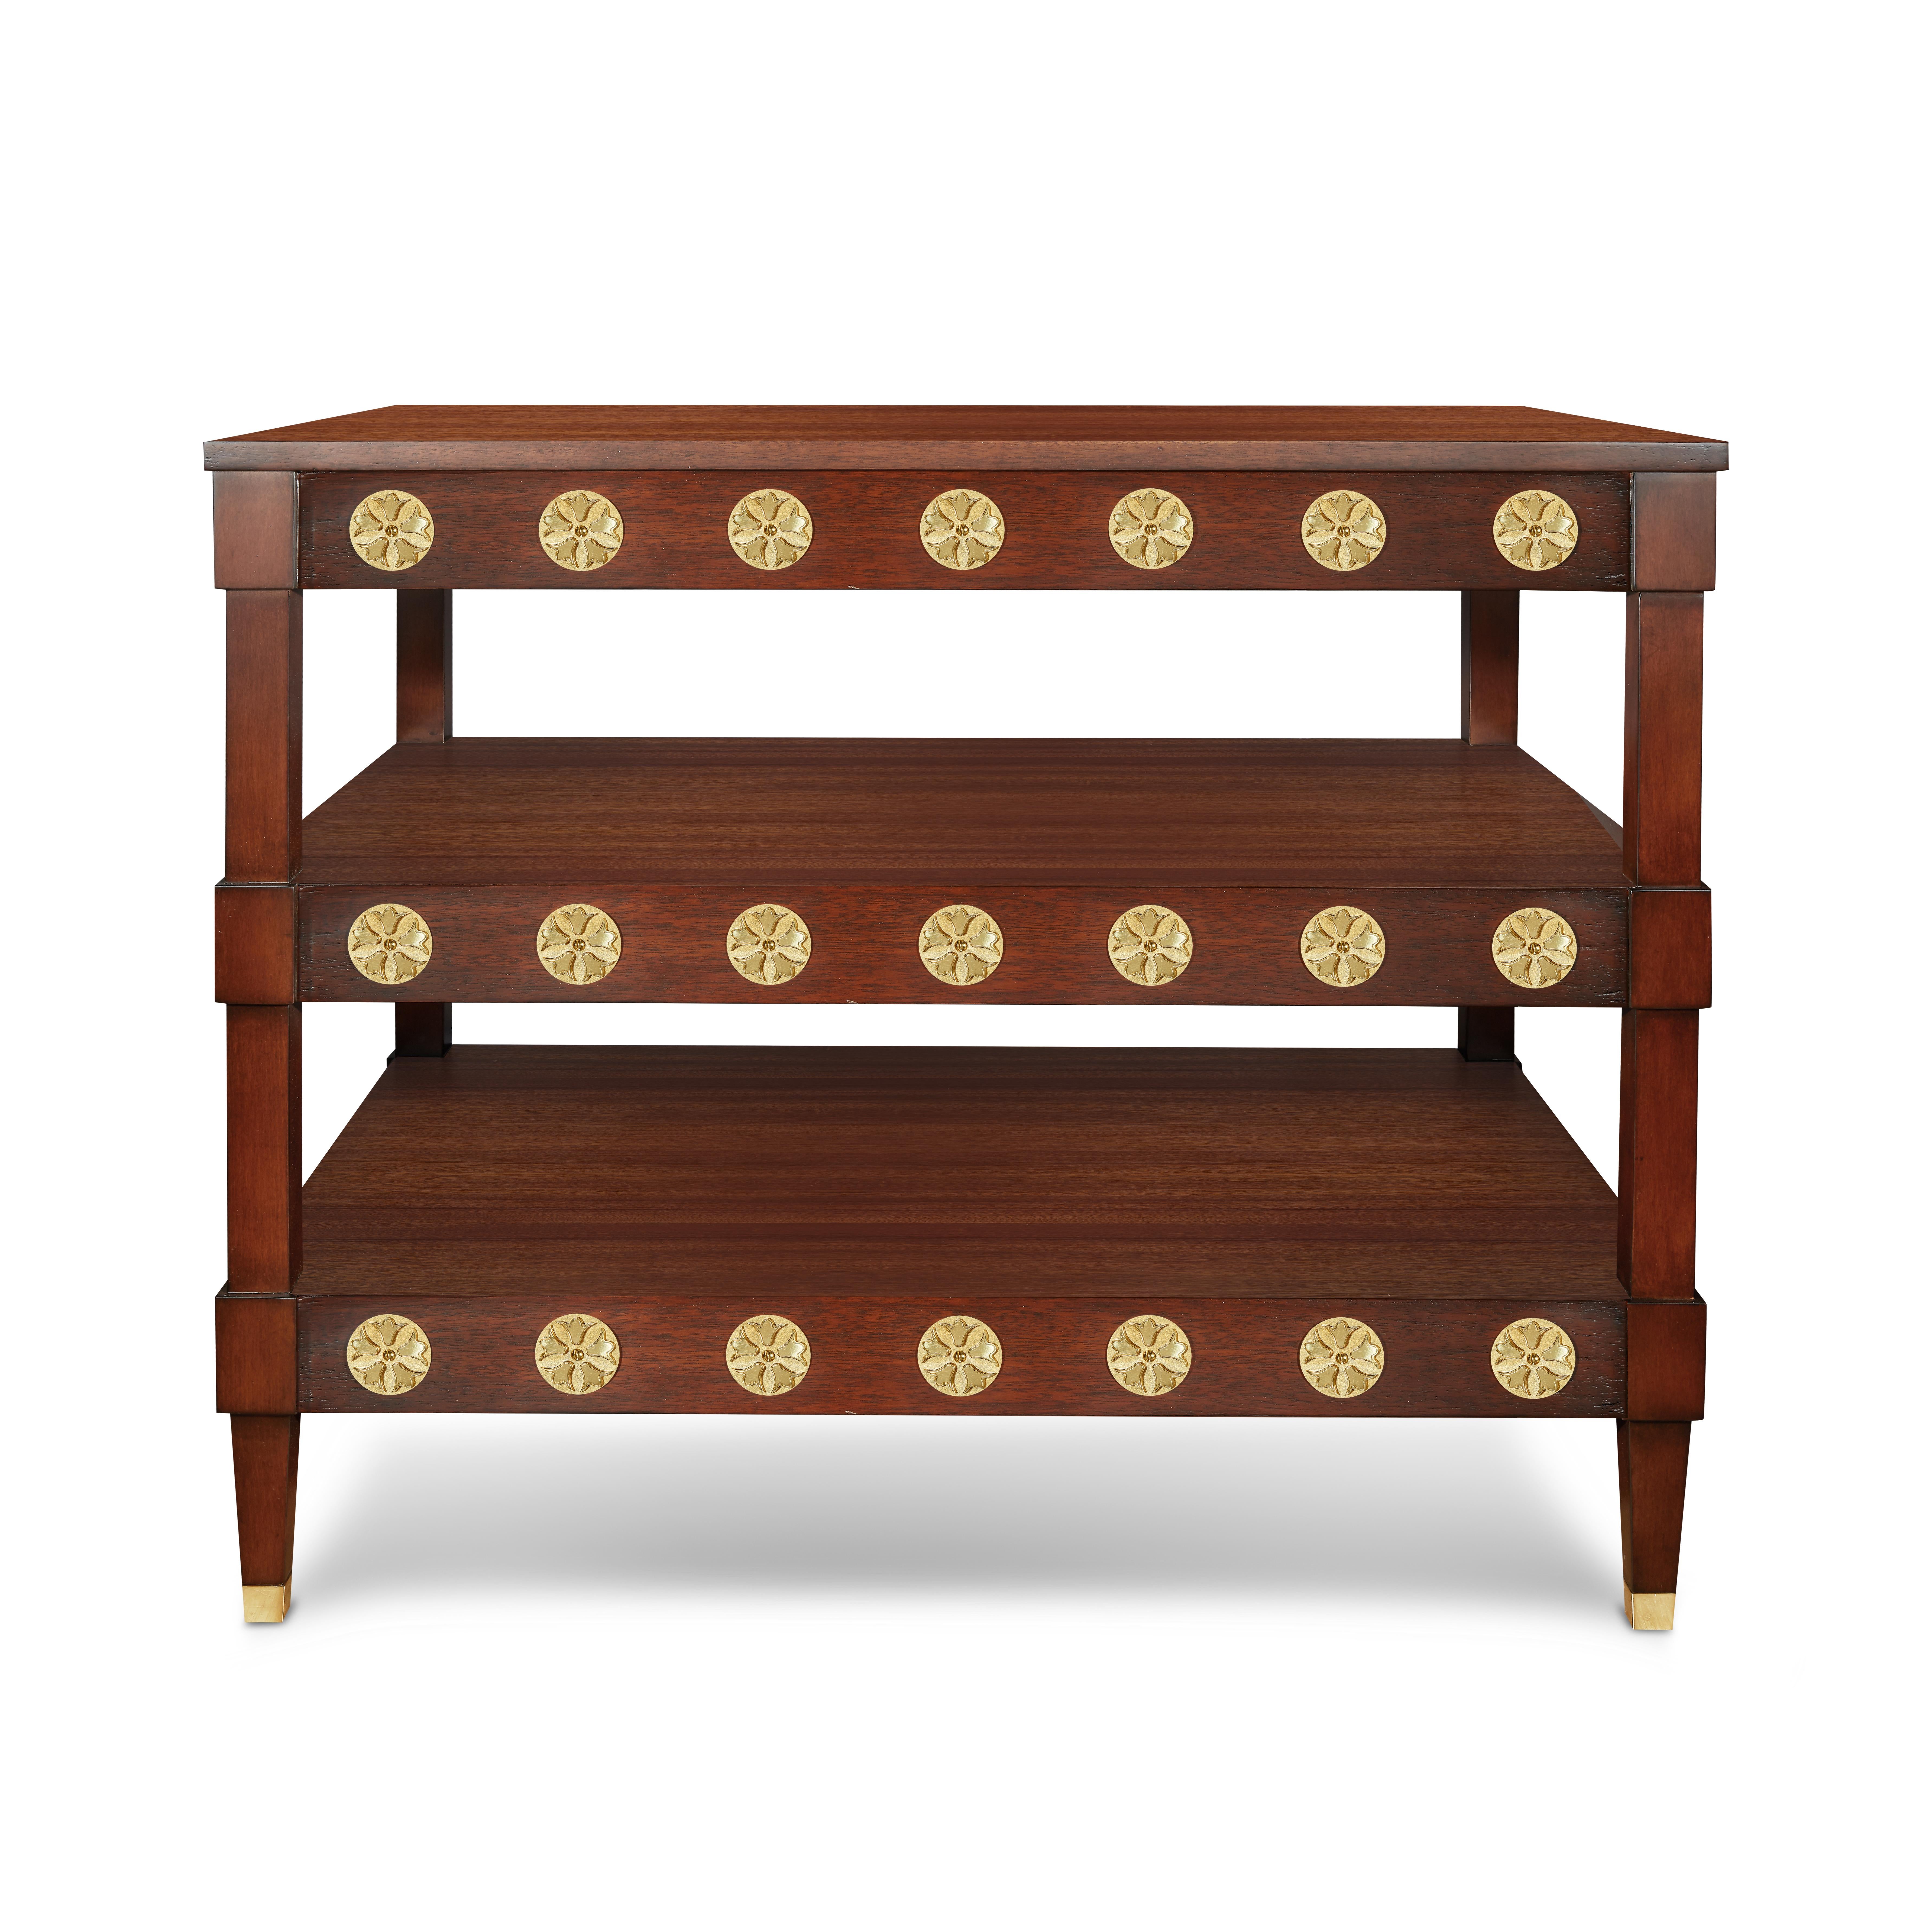 A generously scaled three-tiered table, ideal for use in a library to display your favorite books, or perhaps as a capacious bedside table when paired with a king-size bed. The Duncan table features a mahogany-color finish and refined brass details